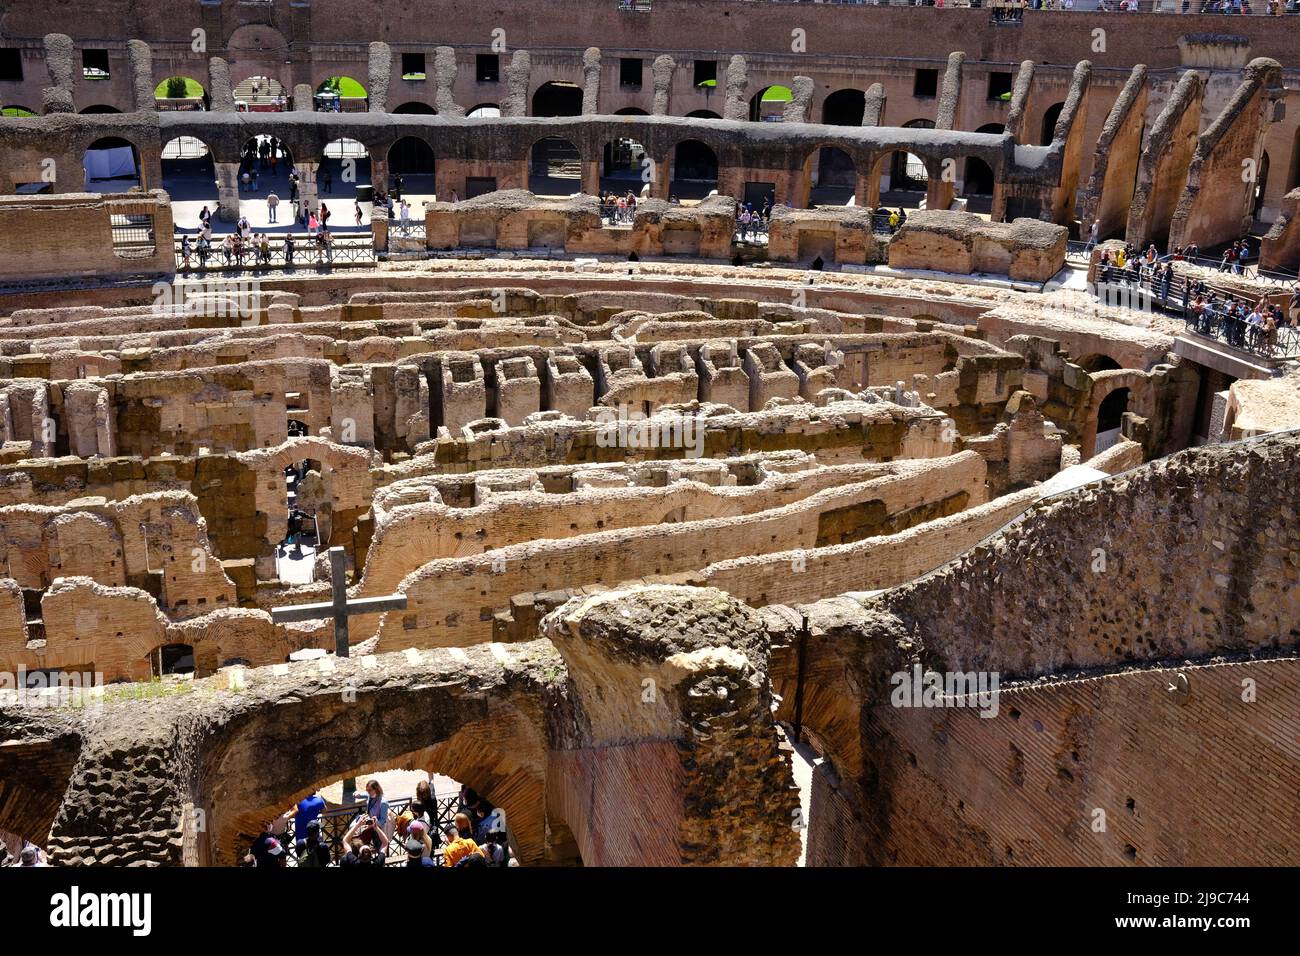 Inside the Roman Colosseum in Rome, Italy Stock Photo